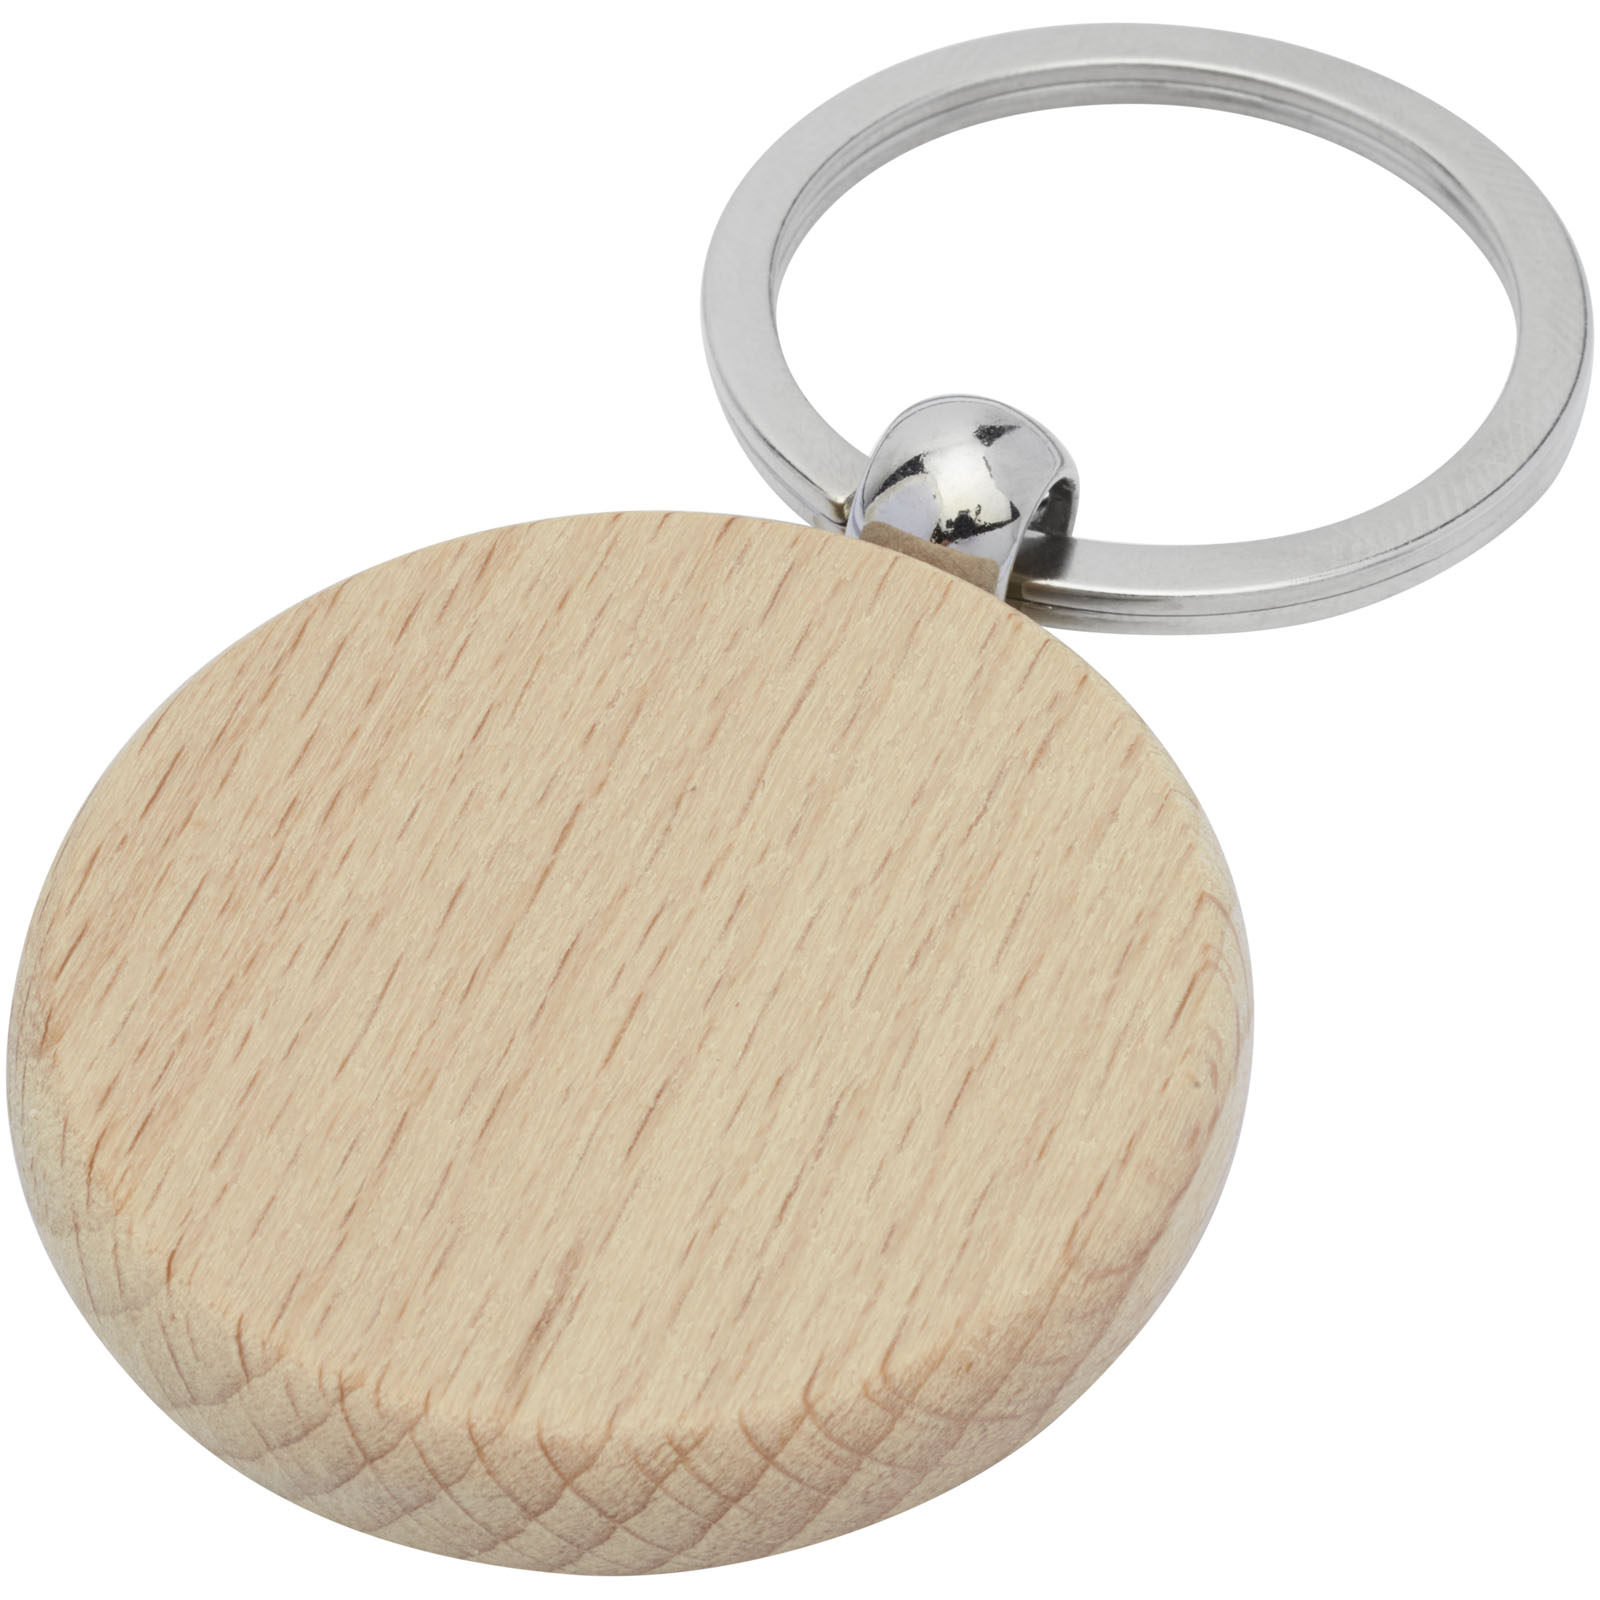 Advertising Keychains & Keyrings - Giovanni beech wood round keychain